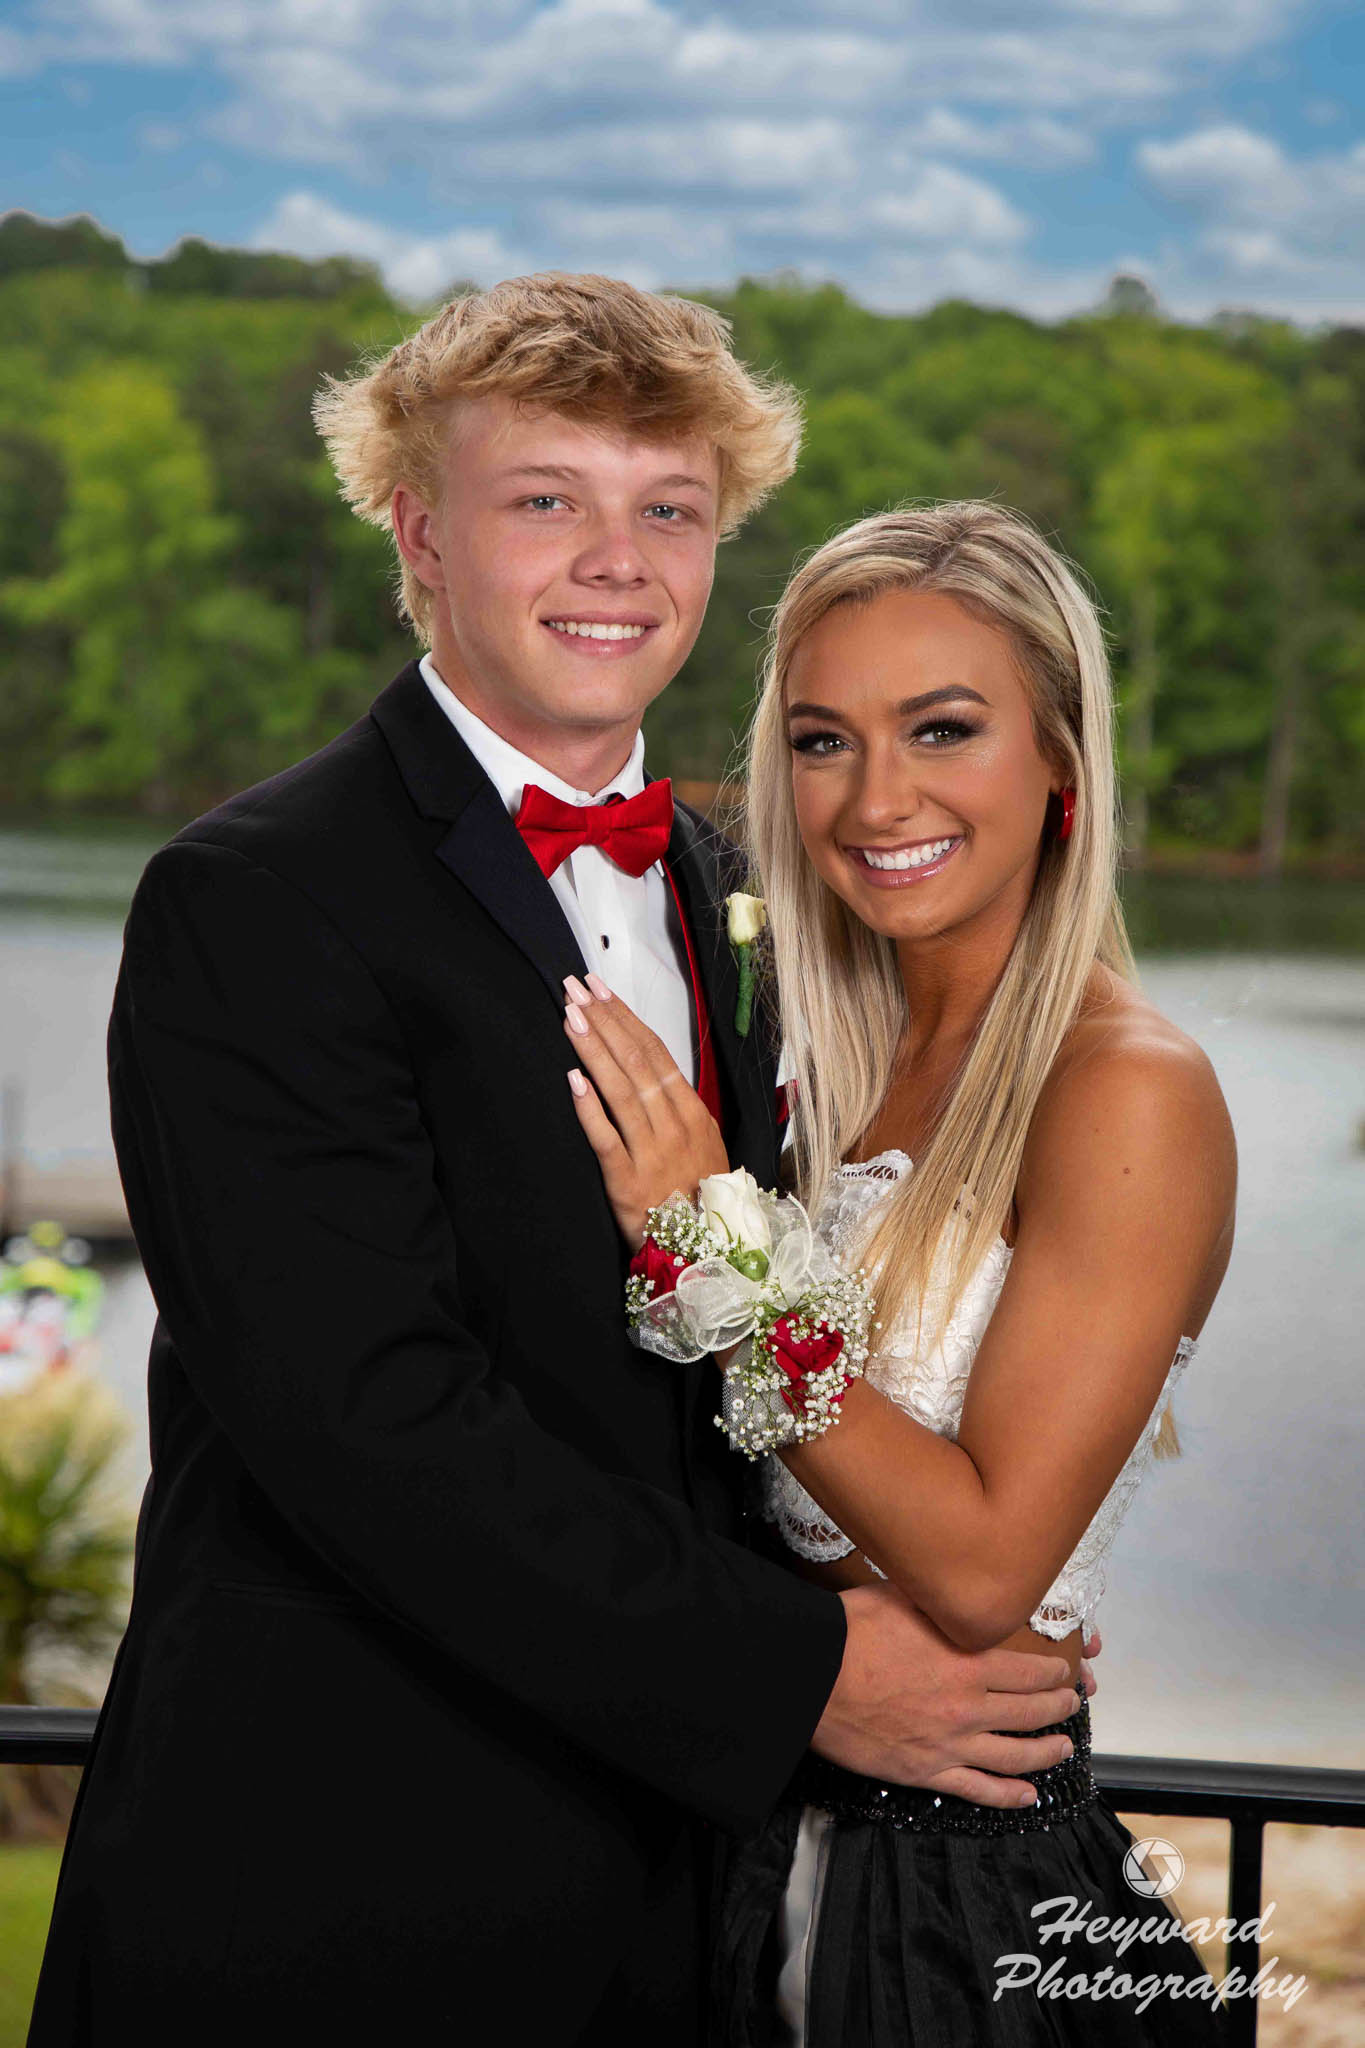 Two high school students pose for a prom portrait.